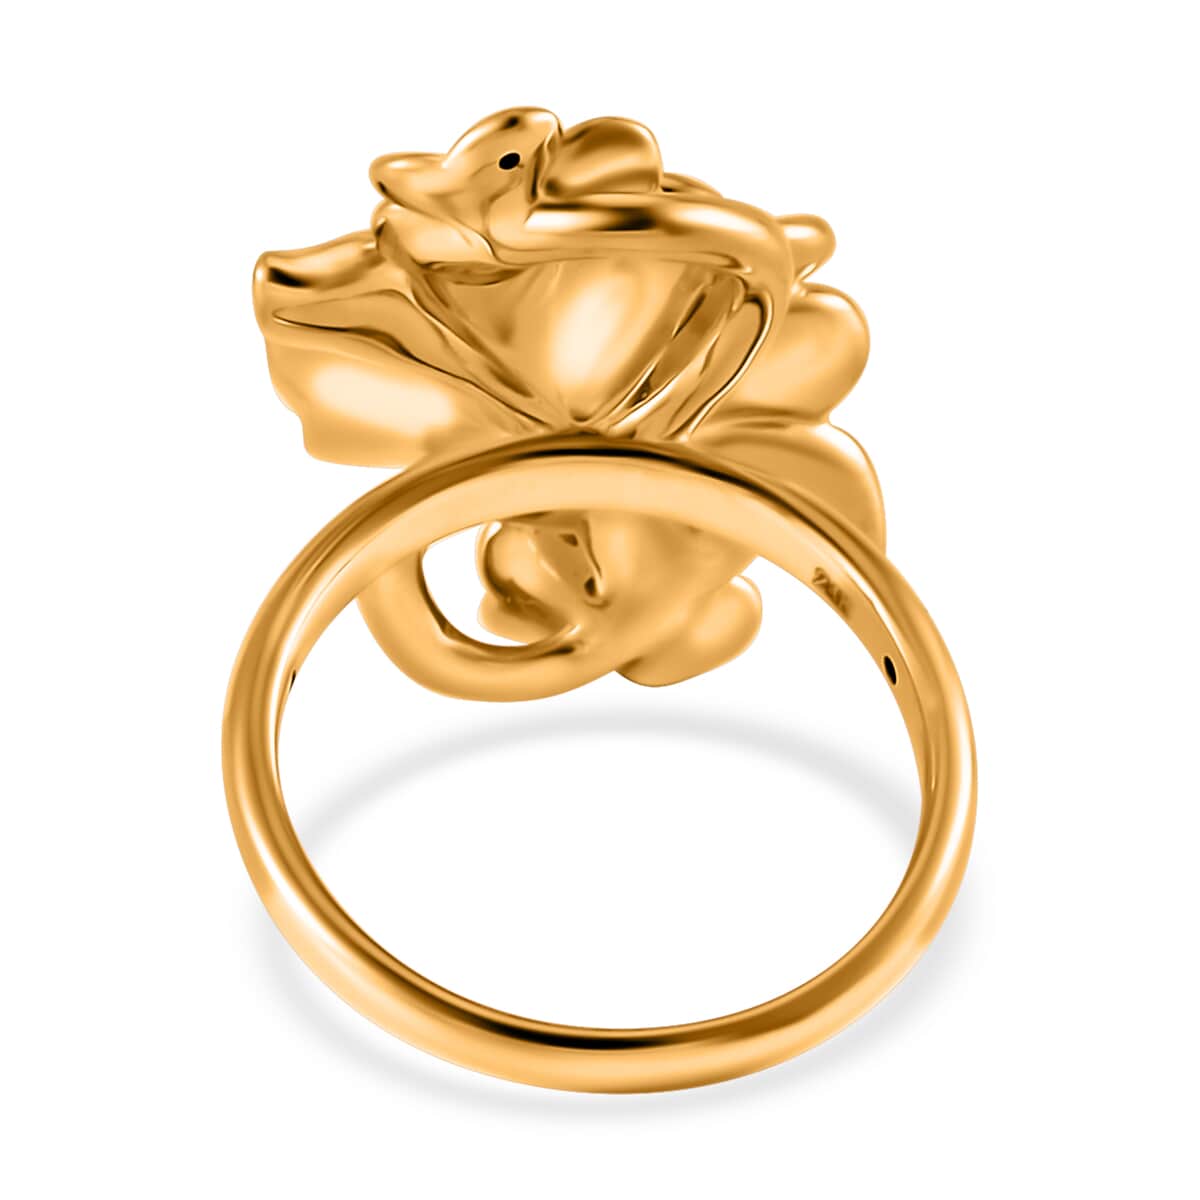 No Brand  24K : Yellow : Gold : Standard  Ring,  Gold Wt. 2.8 g image number 3